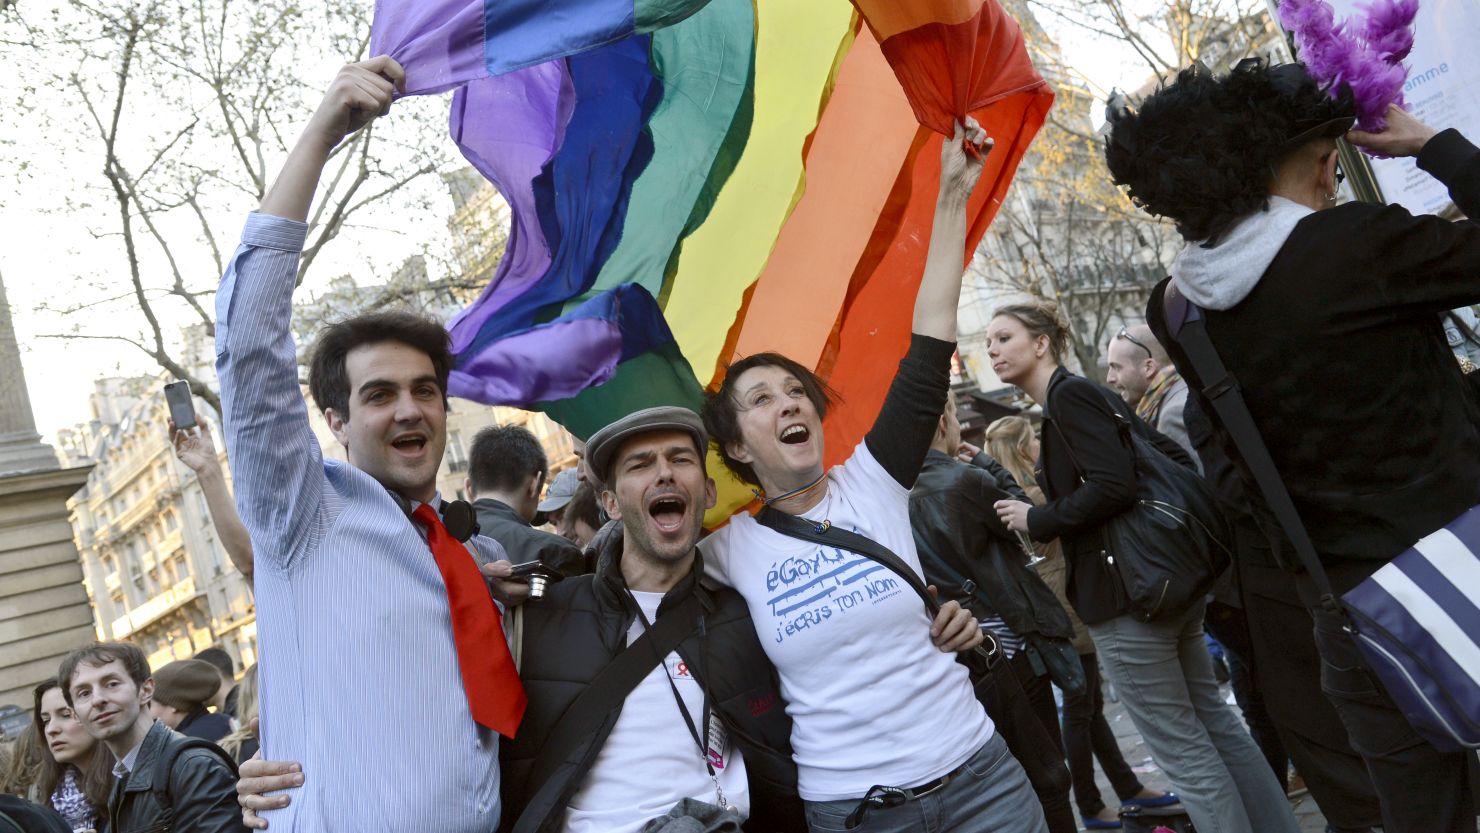 People celebrate in Paris on April 23, 2013, after the French National Assembly adopted a bill legalizing same-sex marriages.